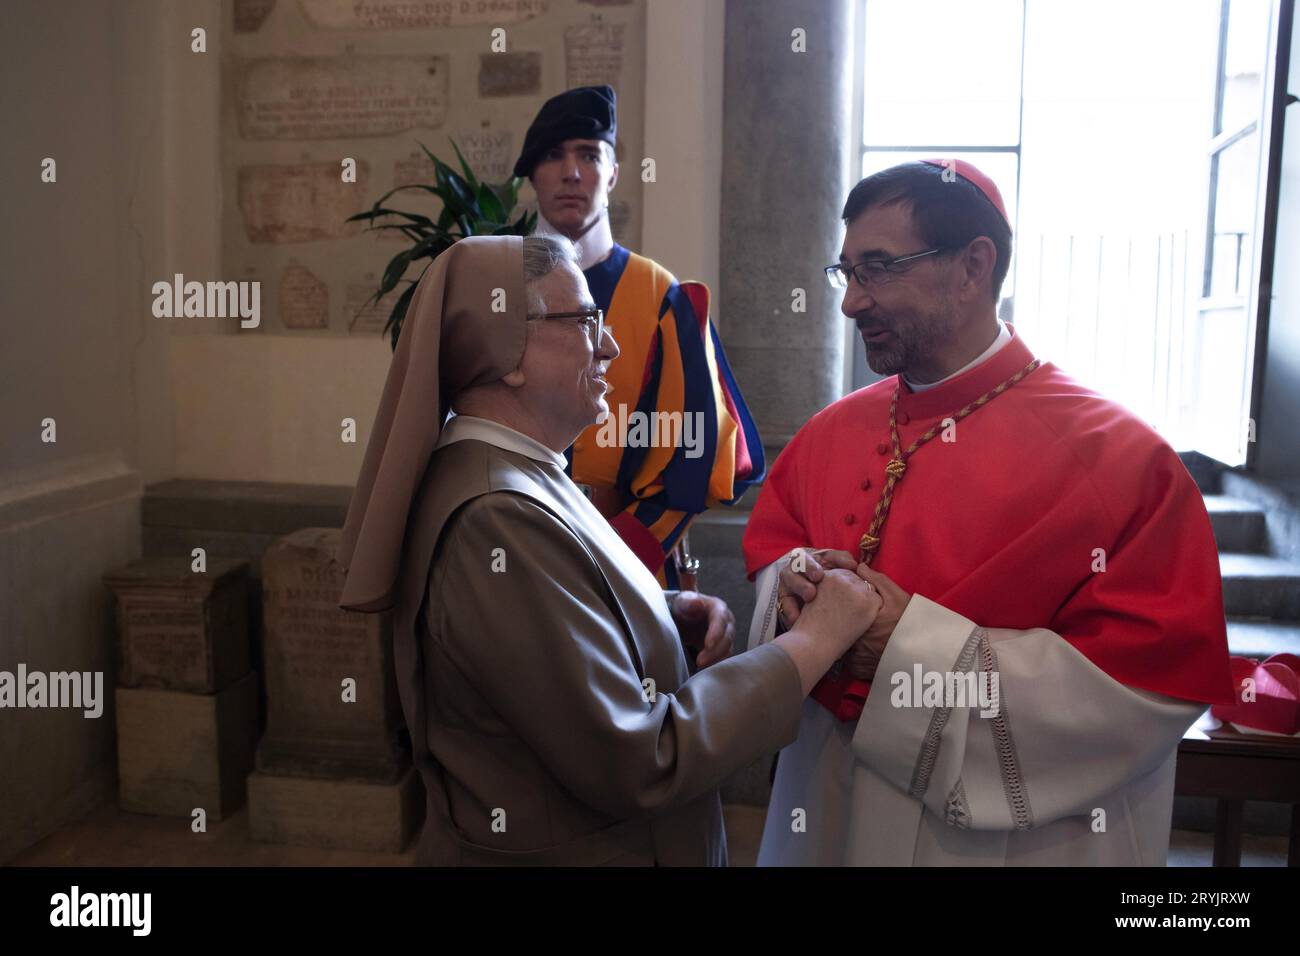 Vatican City, Vatican, 30 September 2023. Newly elected Cardinal Josè Cobo Cano during the courtesy visits in the Apostilic palace. Pope Francis elevates 21 new cardinals during the Ordinary Public Consistory in St. Peter's Square at the vatican. Maria Grazia Picciarella/Alamy Live News Stock Photo